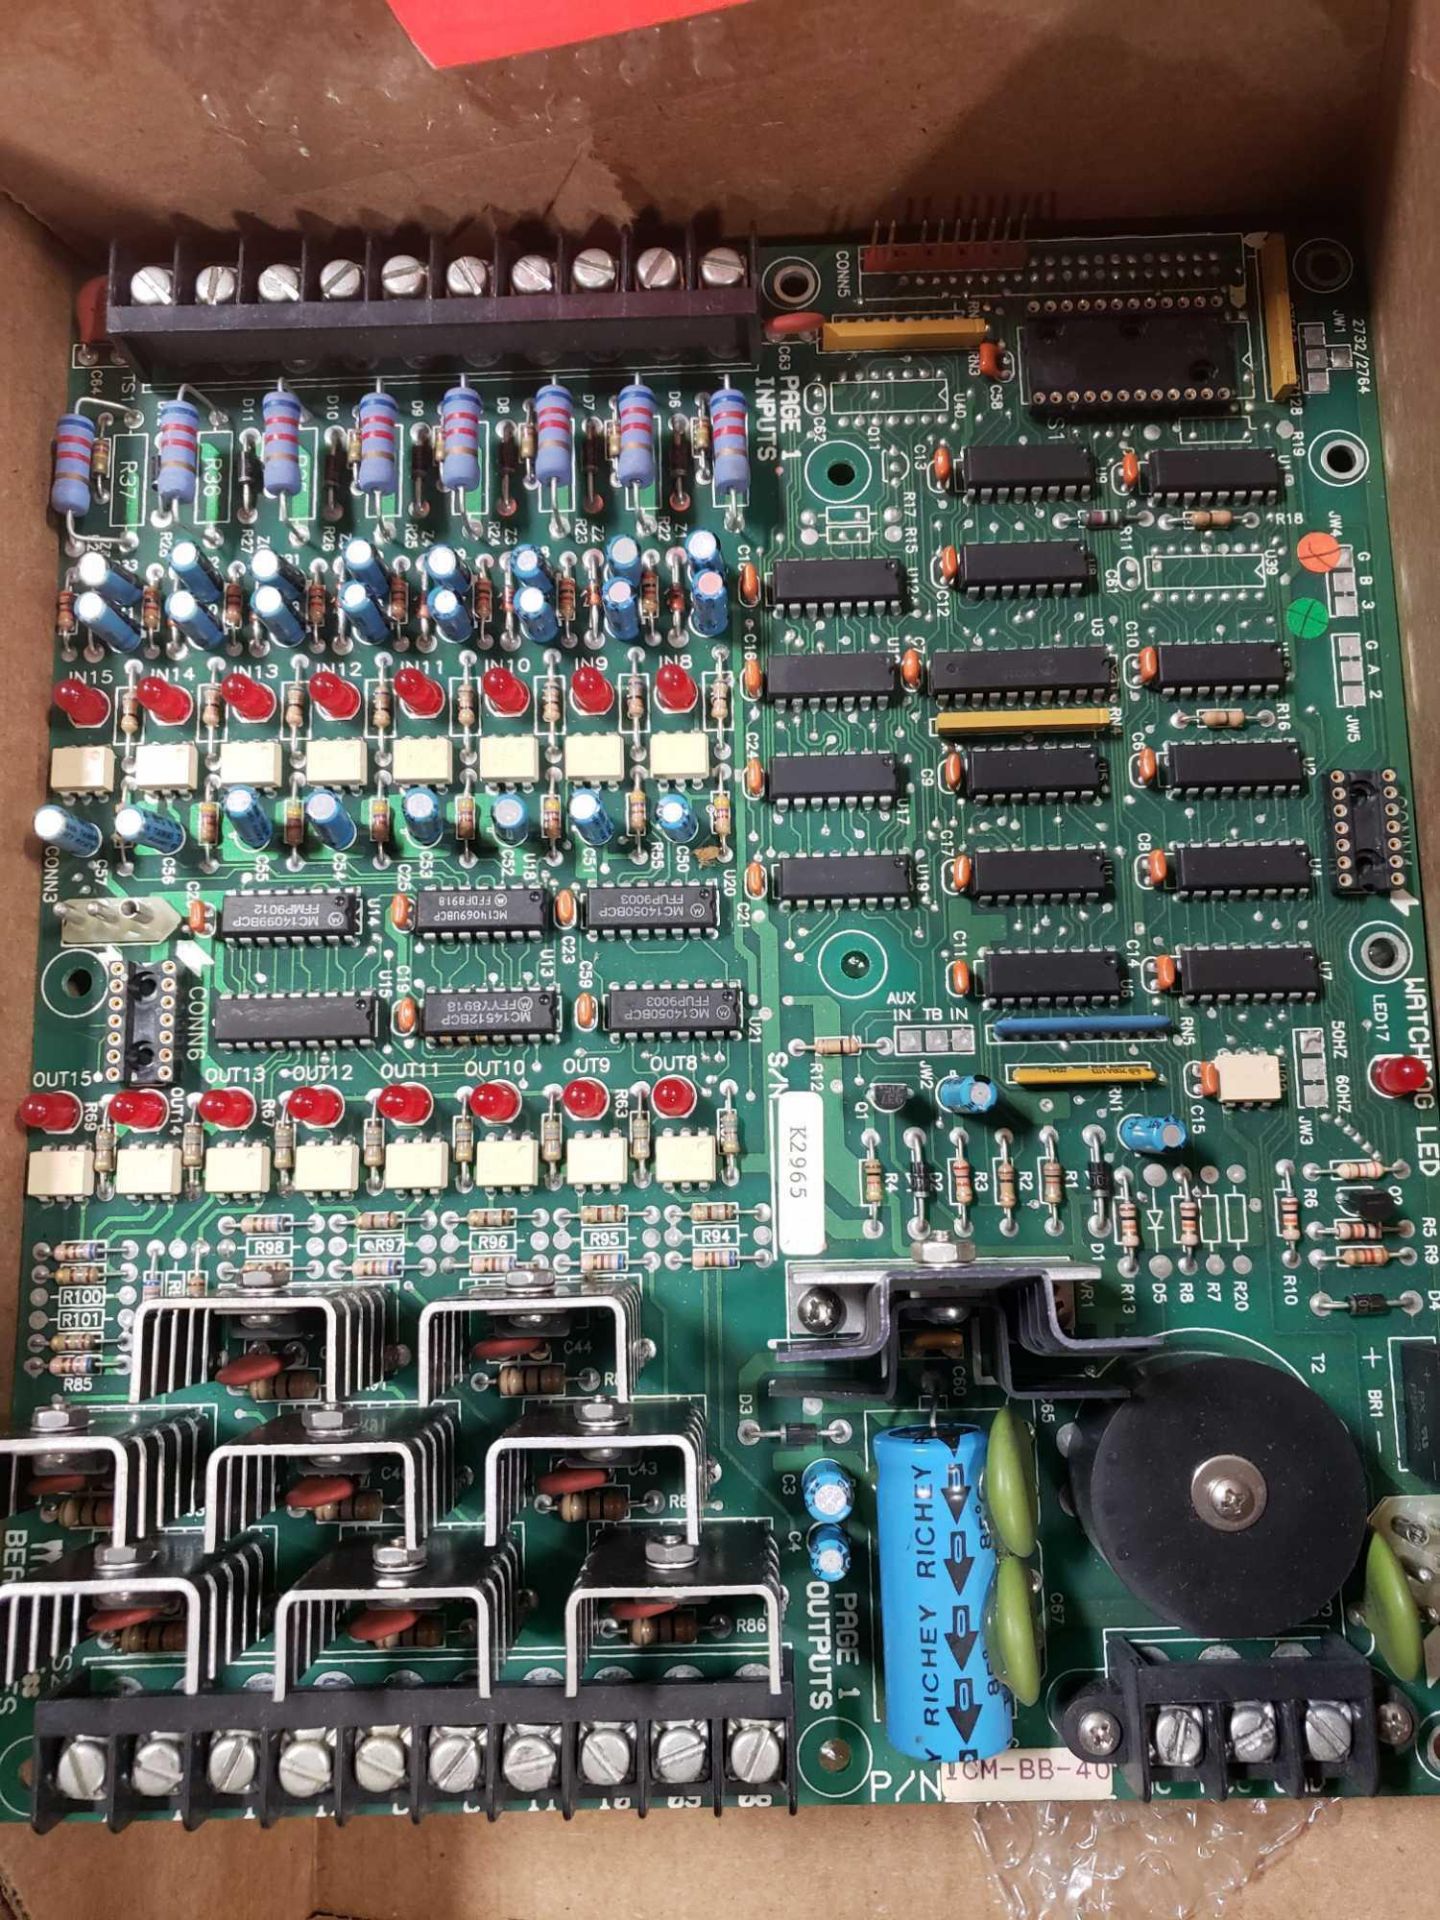 Devilbiss control board model ICM-BB-40. - Image 4 of 4